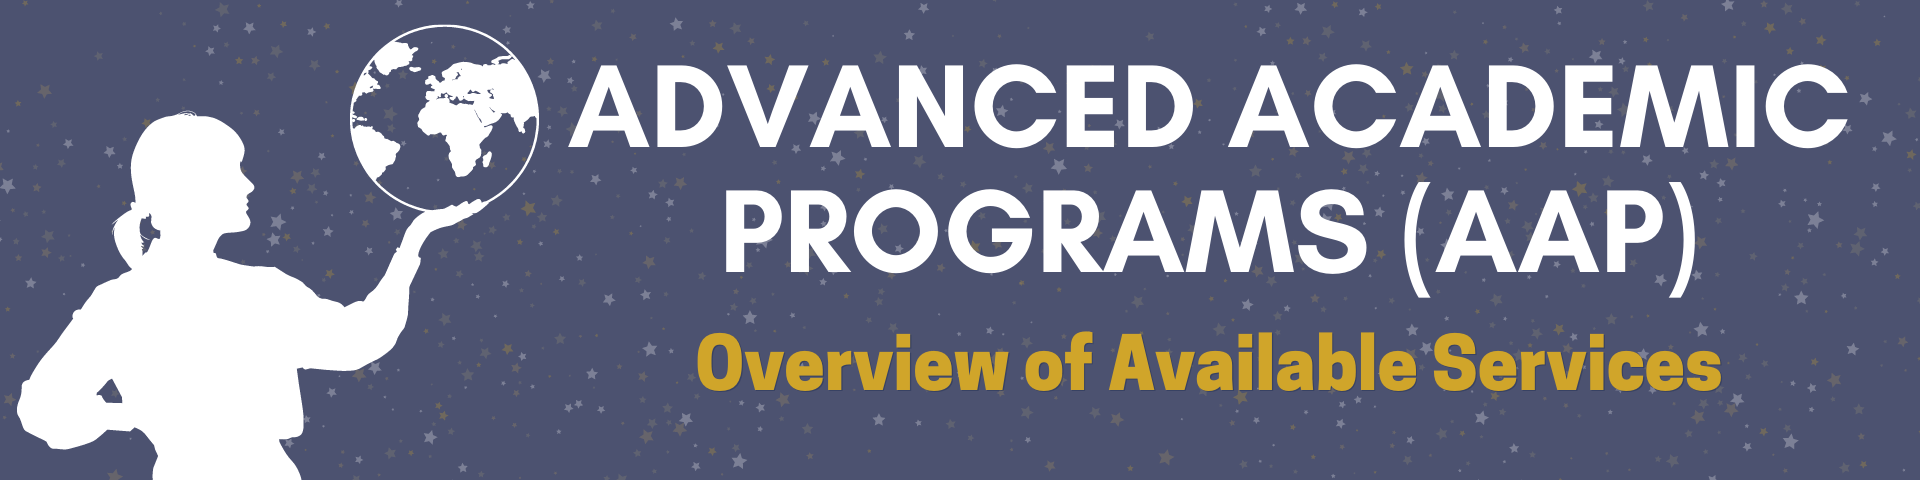 advanced academic programs: overview of available services